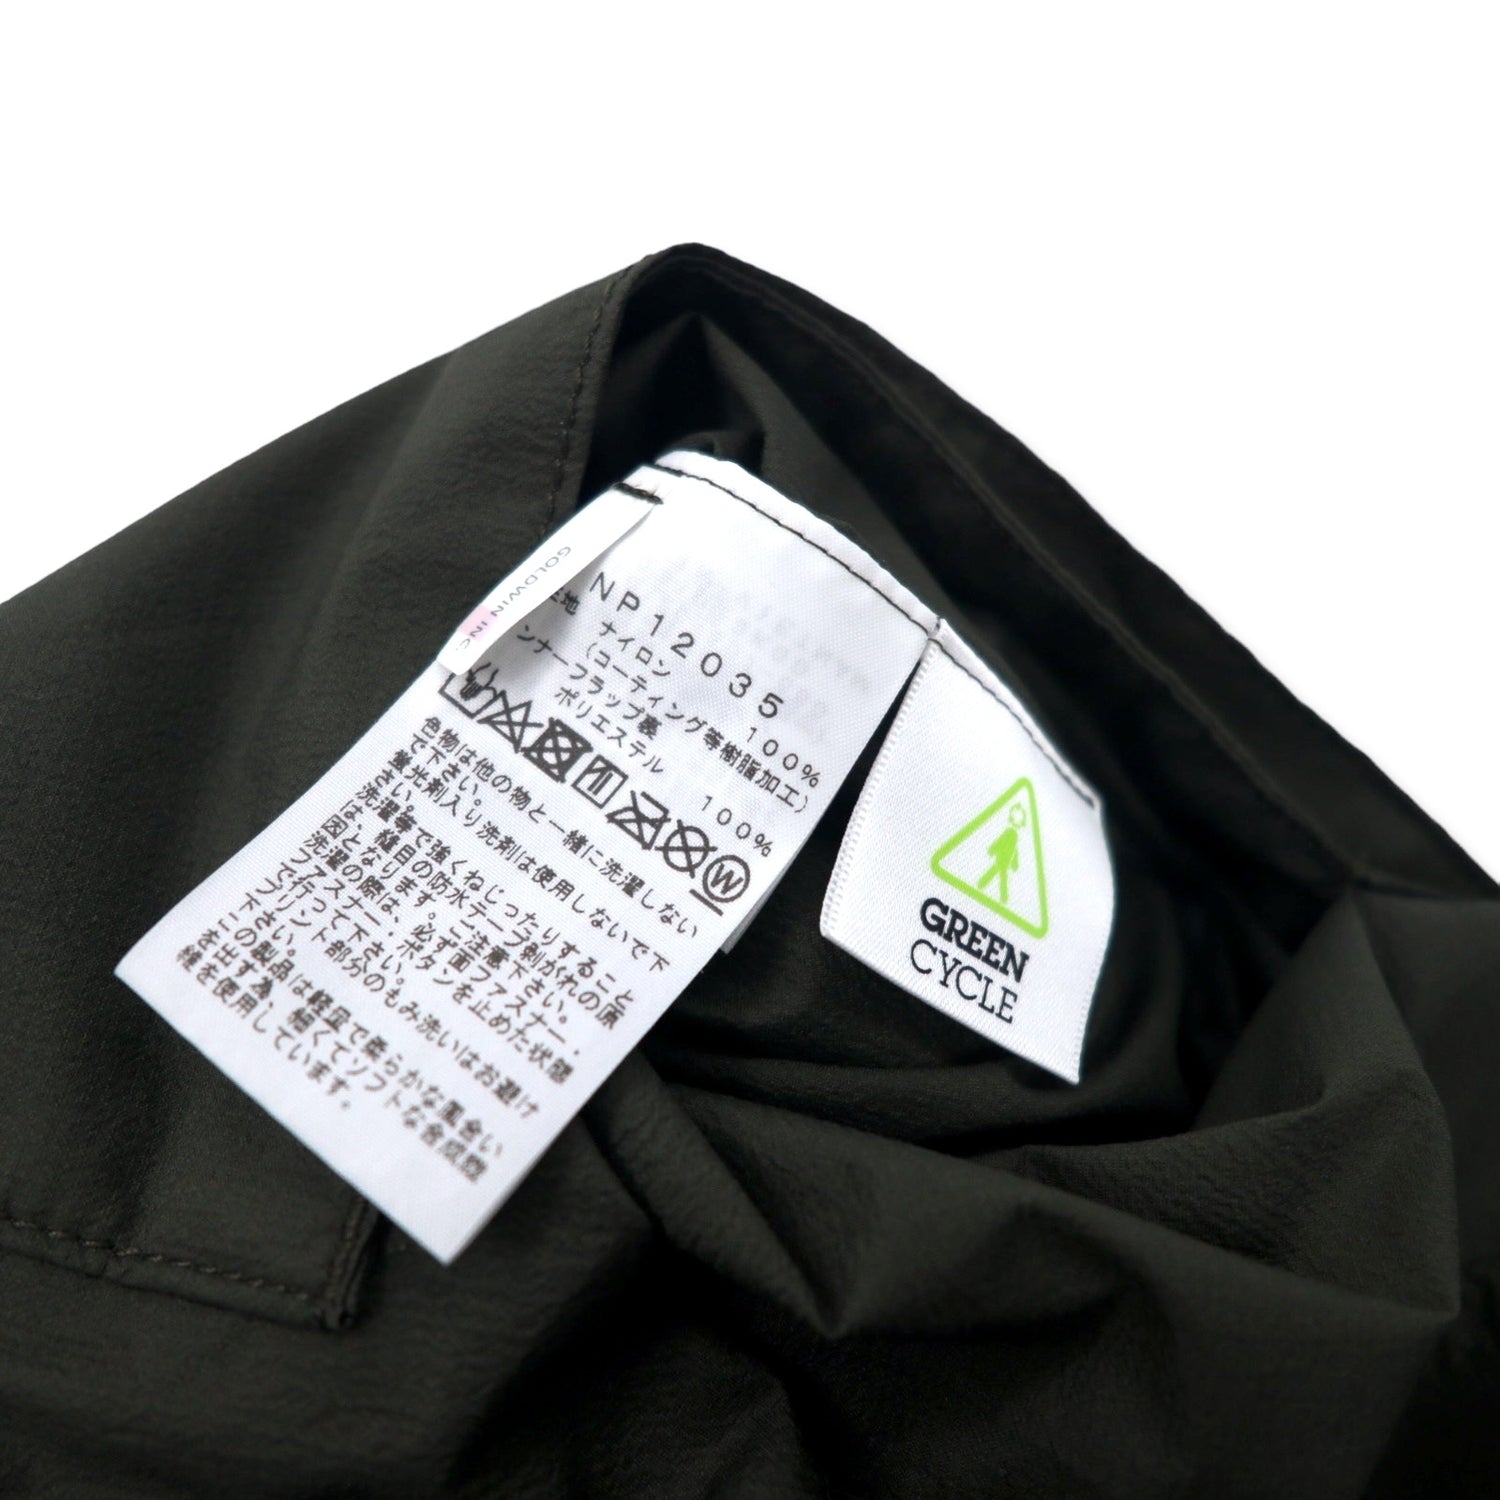 THE NORTH FACE マウンテンパーカー L カーキ ナイロン 防水 Mountain Parka NP12035